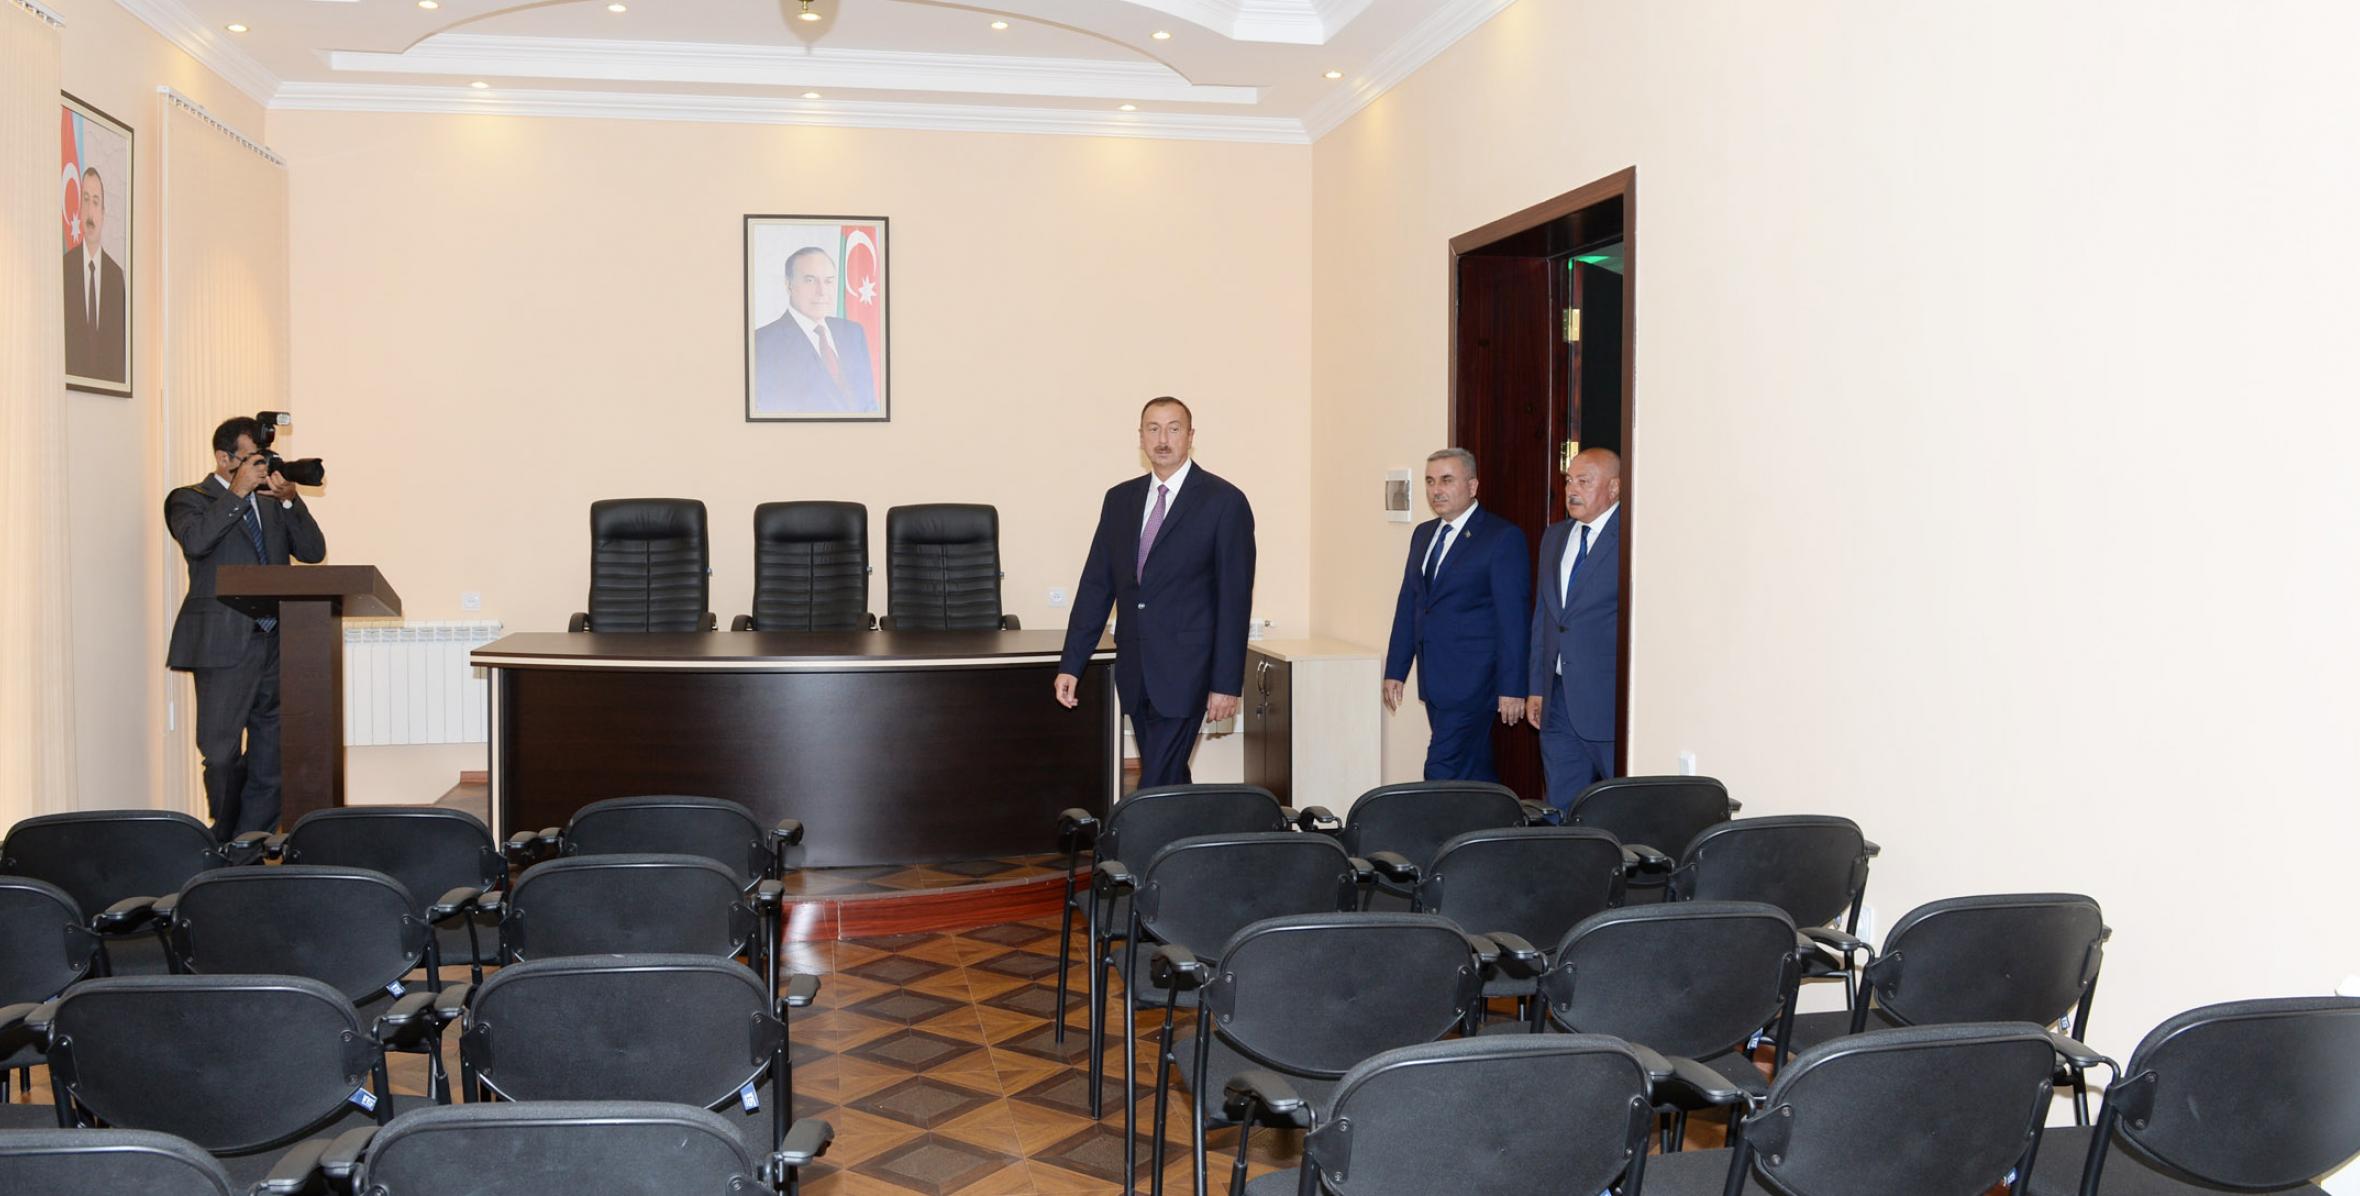 Ilham Aliyev attended the opening of a new office building of Masalli District branch of the "Yeni Azerbaijan Party"